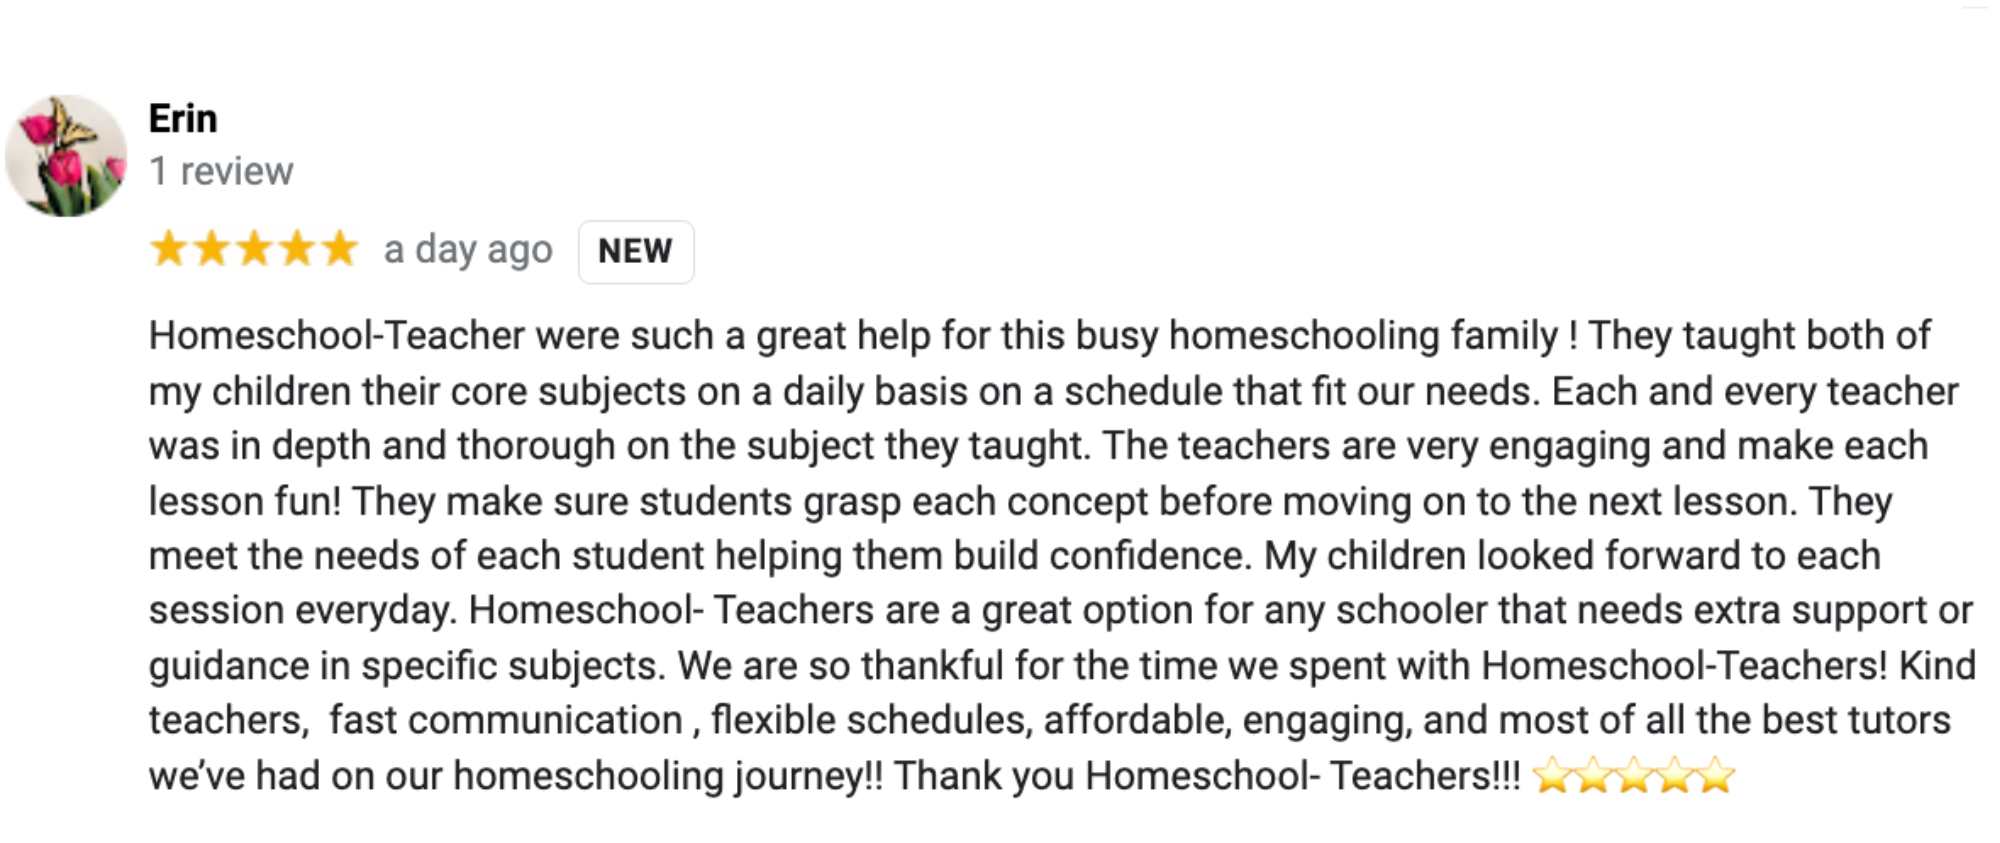 Homeschool review by Erin